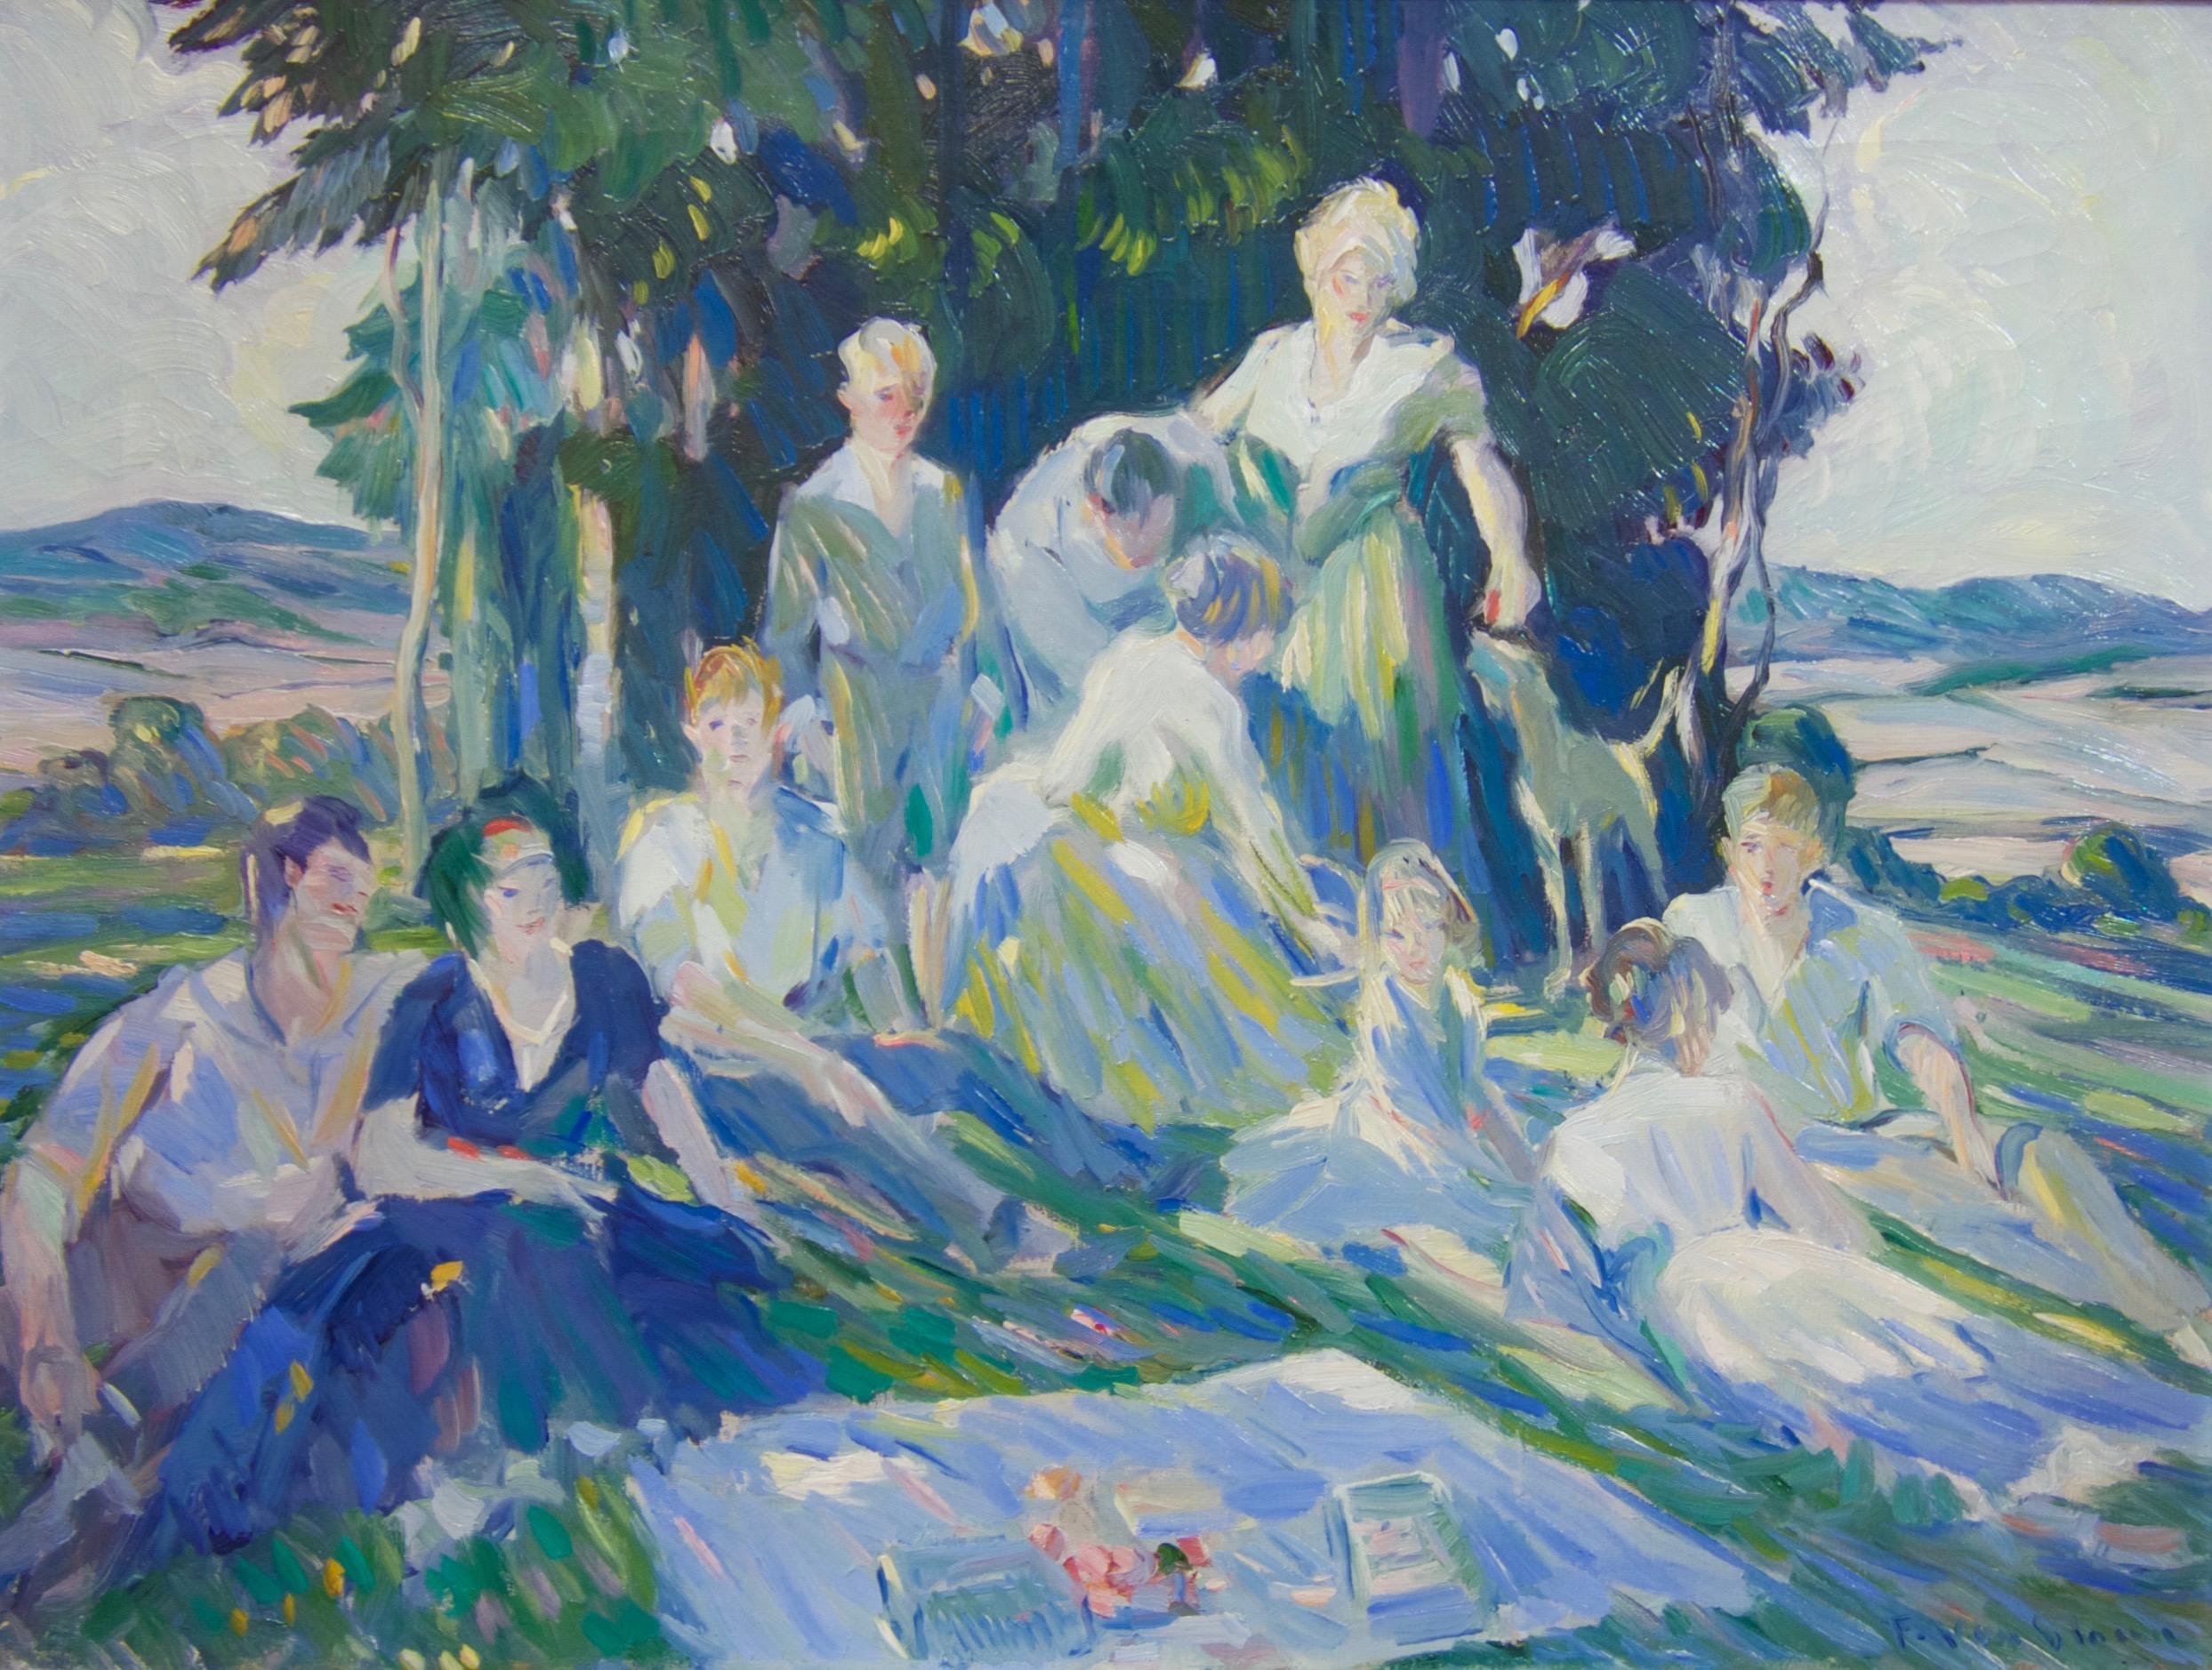 Quintessential California impressionist oil painting on canvas by artist Frank van Sloun depicting a group of people, possibly a family at leisure in the warm California sun.  
About the artist:  Frank van Sloun, (American 1879-1938), was an